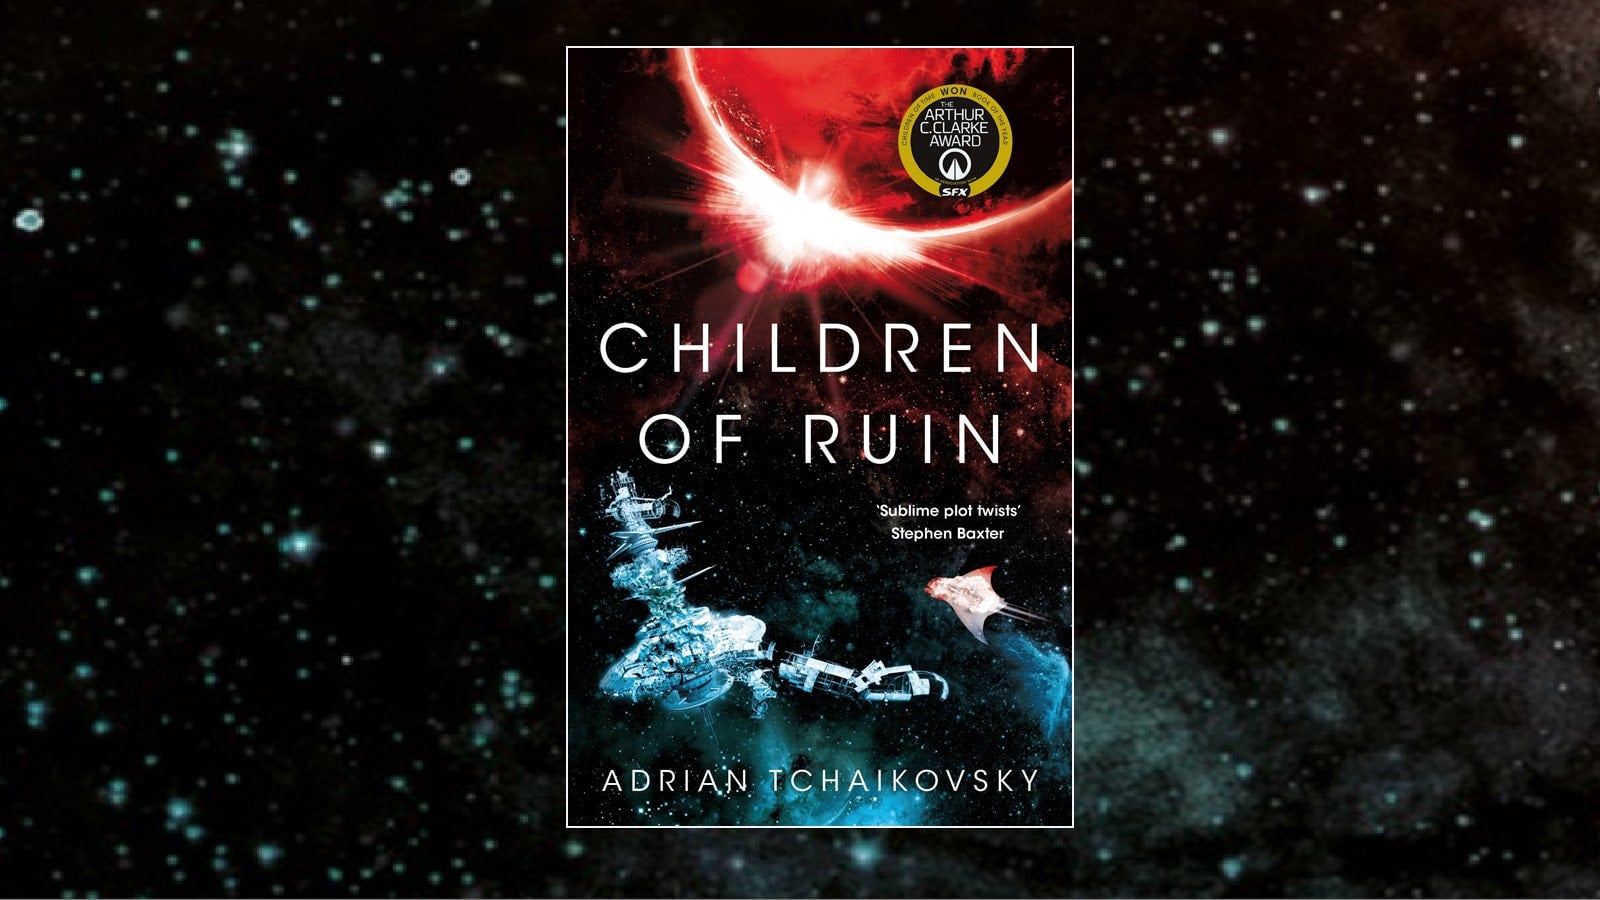 Children of Ruin book jacket against the background of a starry night